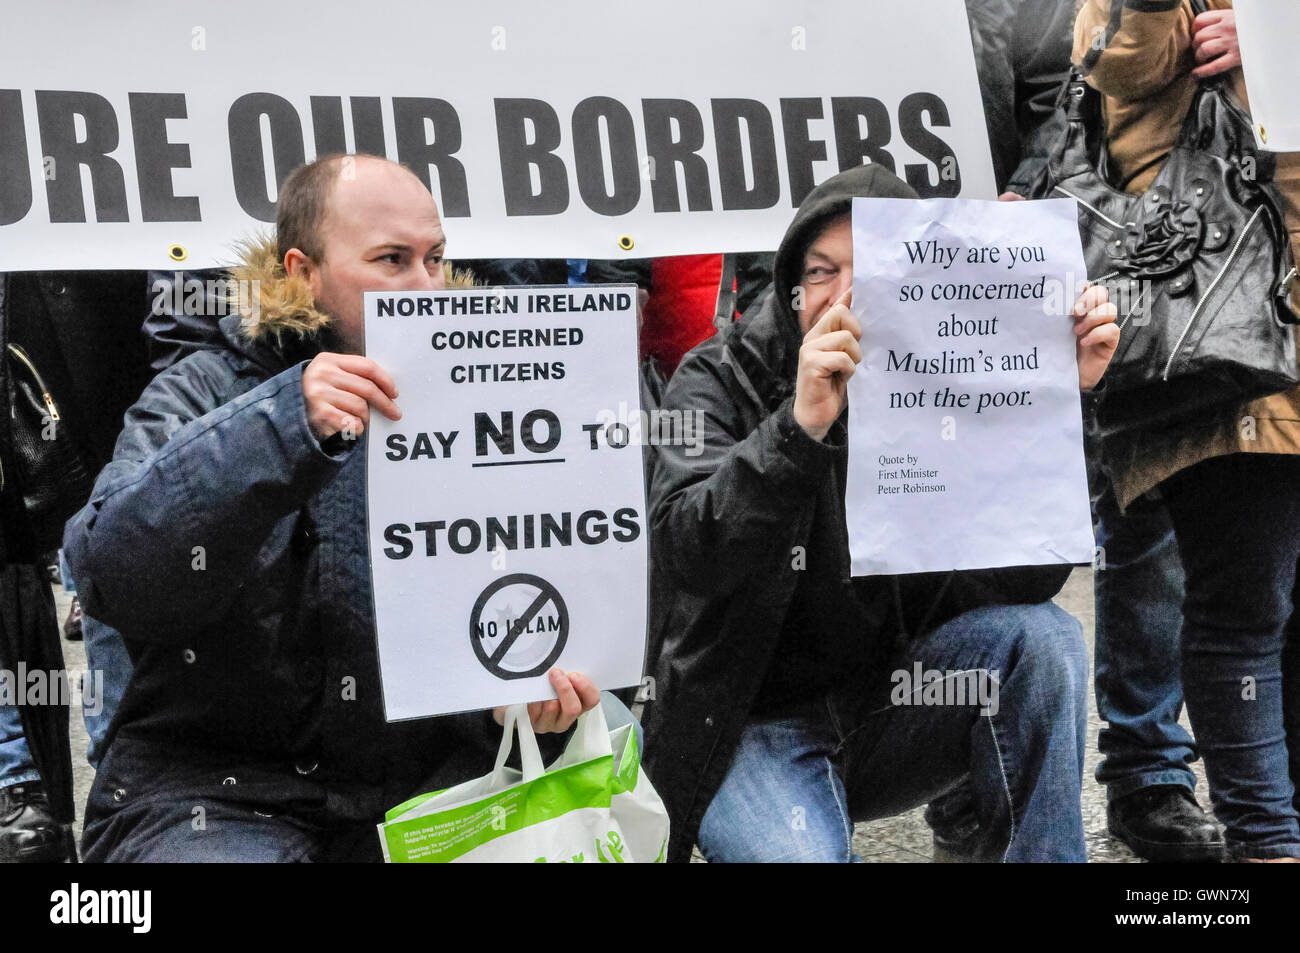 Belfast, Northern Ireland. 05 Dec 2015 - The Protestant Coalition hold a protest against Islamic refugees coming to Northern Ireland. Stock Photo